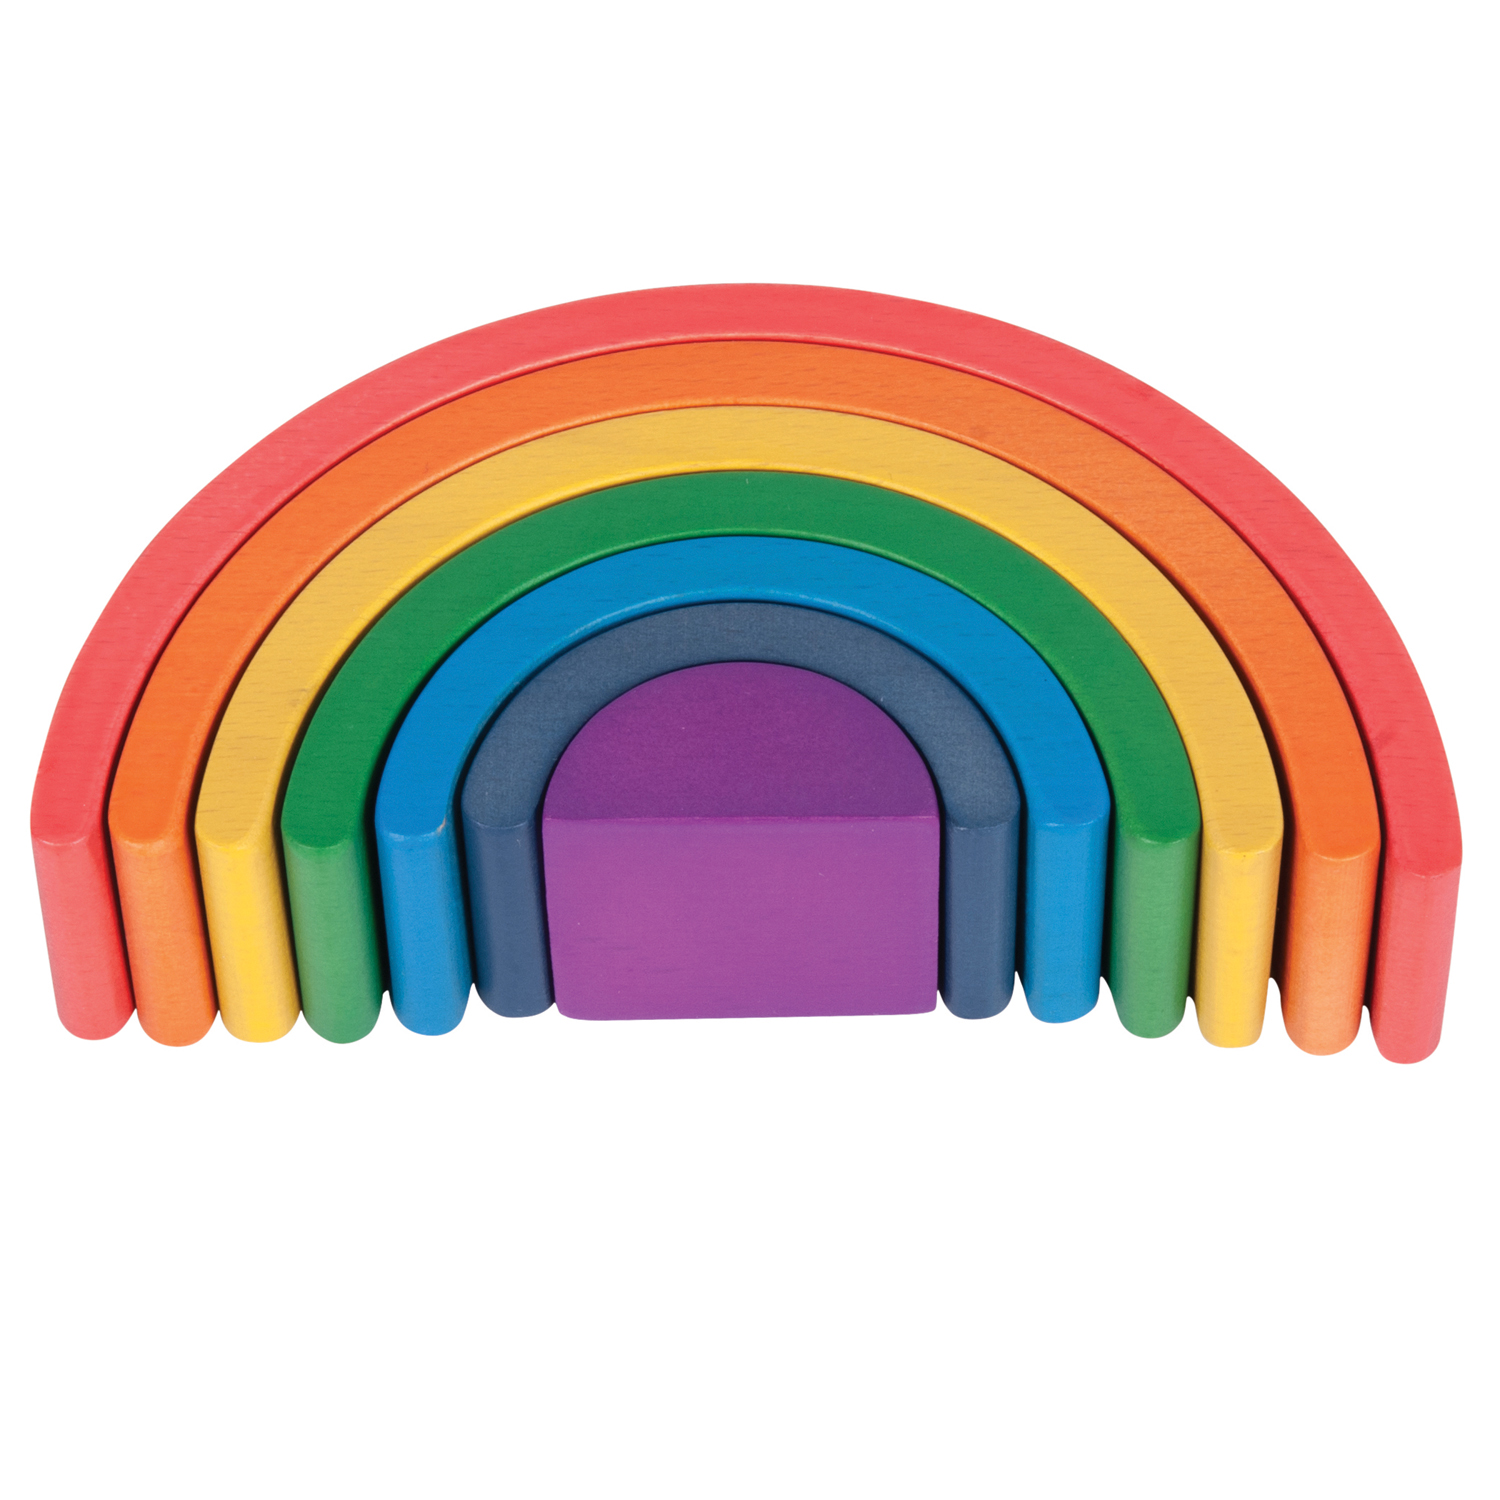 TickiT Wooden Rainbow Architect Arches - Set of 7